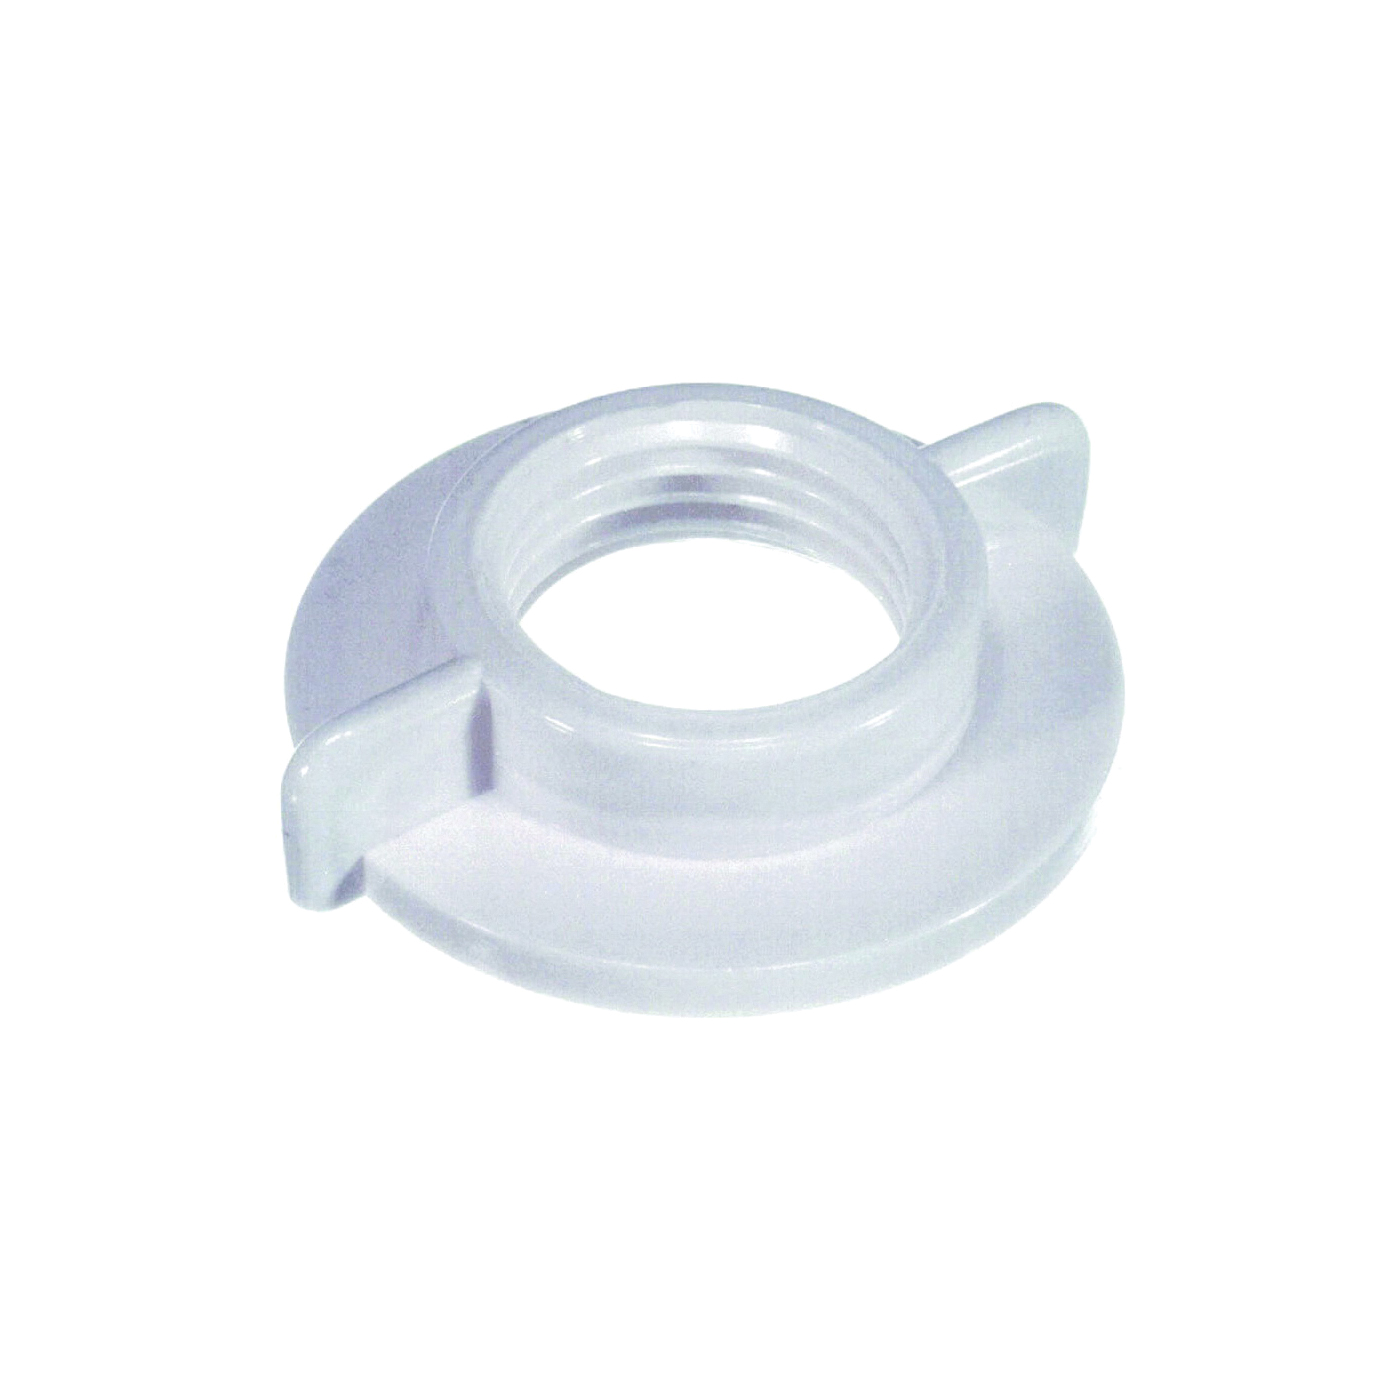 80990 Faucet Shank Locknut, Universal, Plastic, White, For: 1/2 in IPS Connections